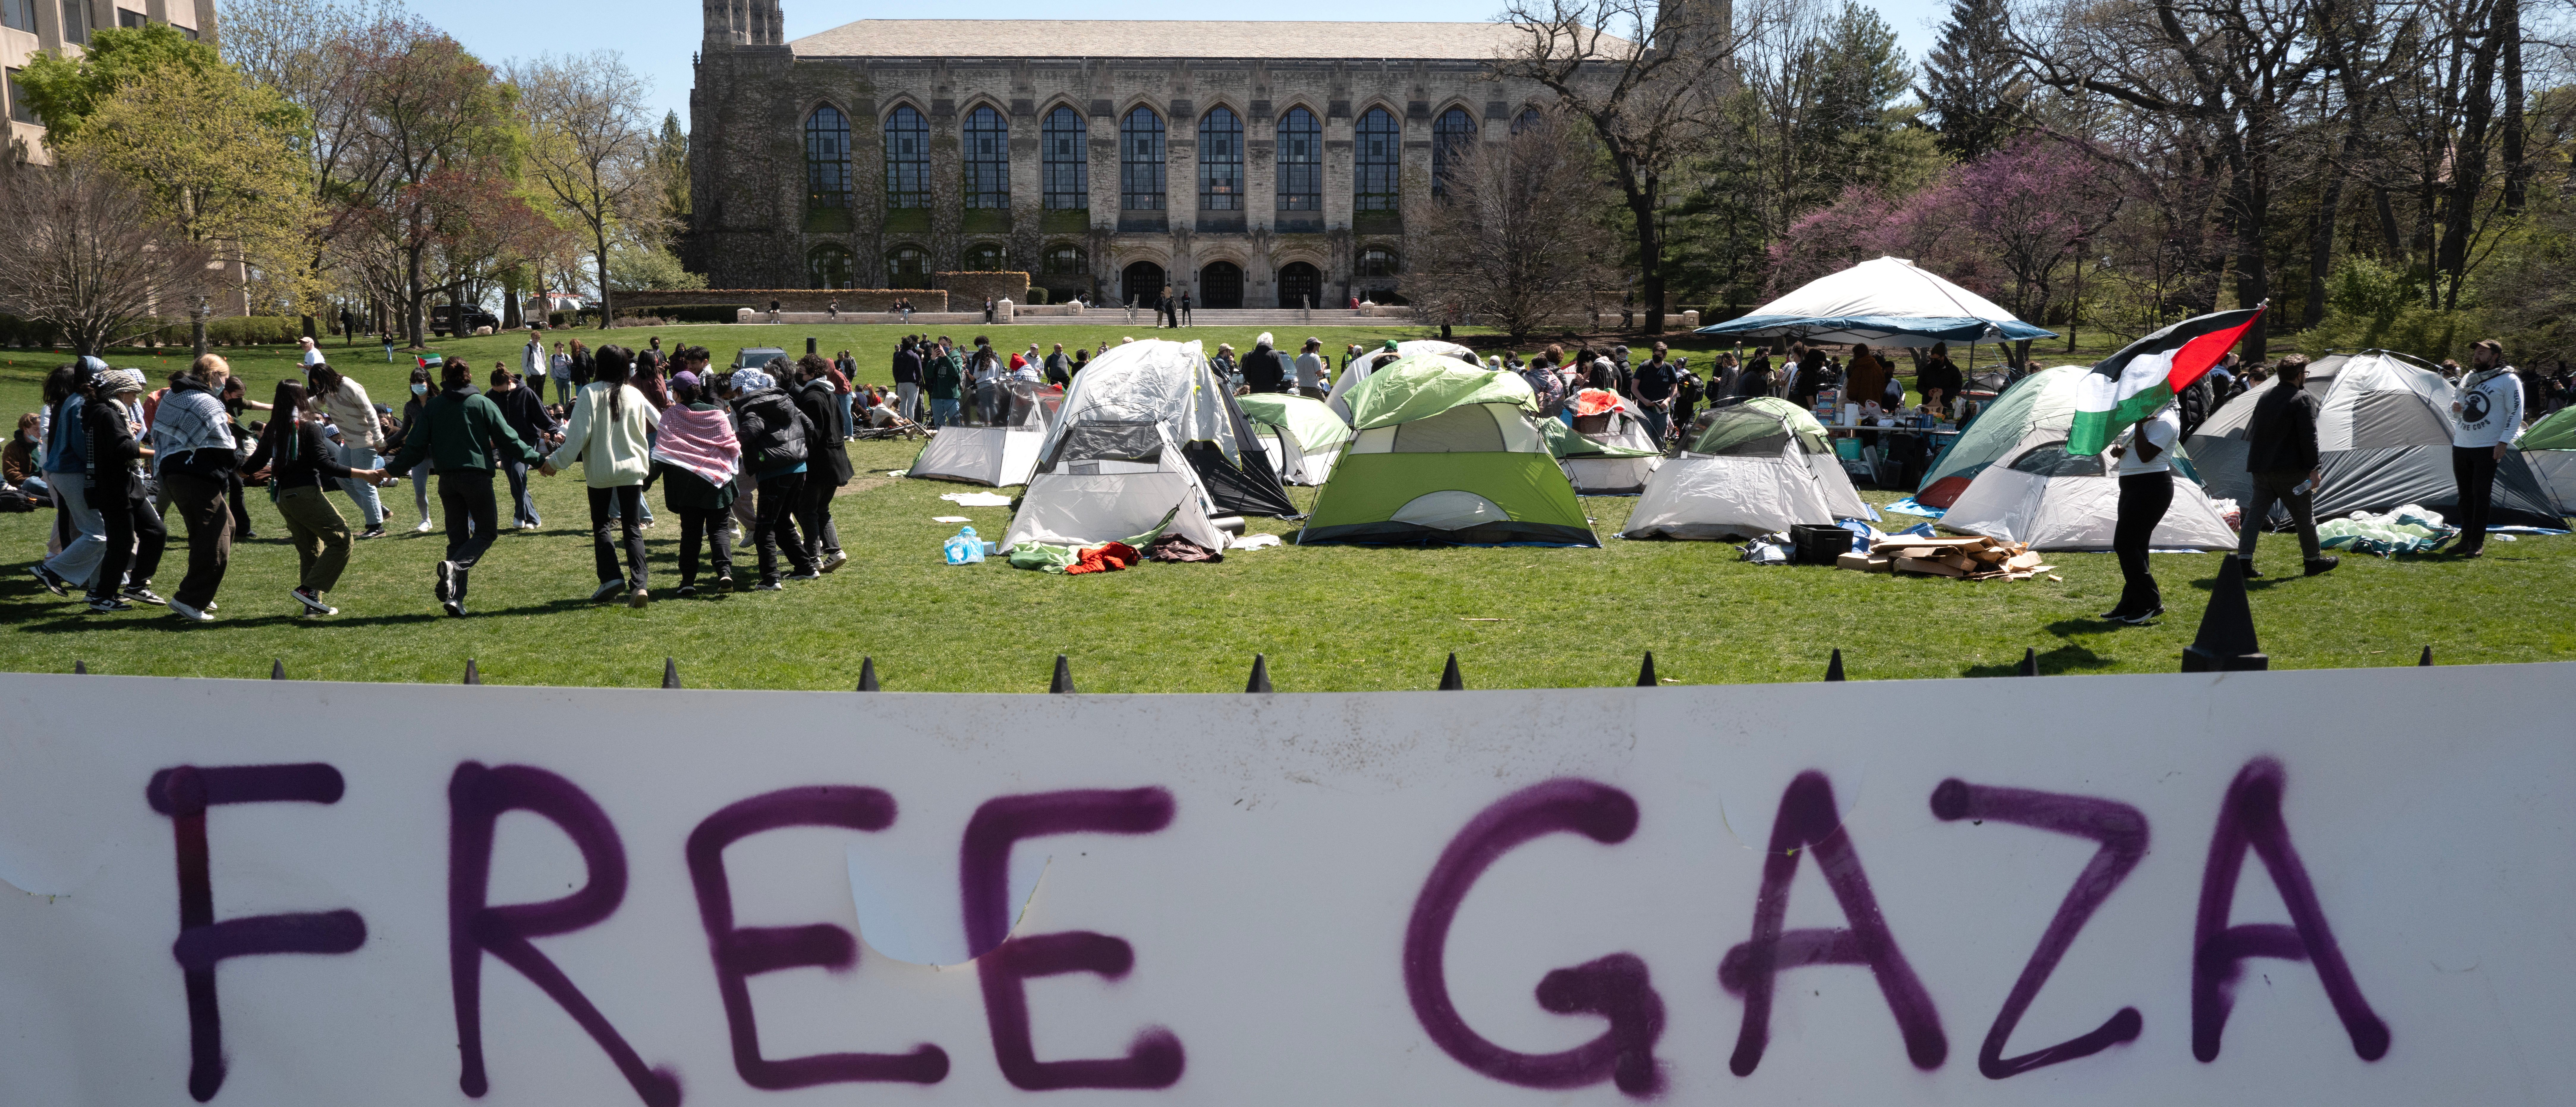 EVANSTON, ILLINOIS - APRIL 25: People rally on the campus of Northwestern University to show support for residents of Gaza on April 25, 2024 in Evanston, Illinois. The rally is among many roiling university campuses across the country in response to the ongoing war in Gaza. (Photo by Scott Olson/Getty Images)